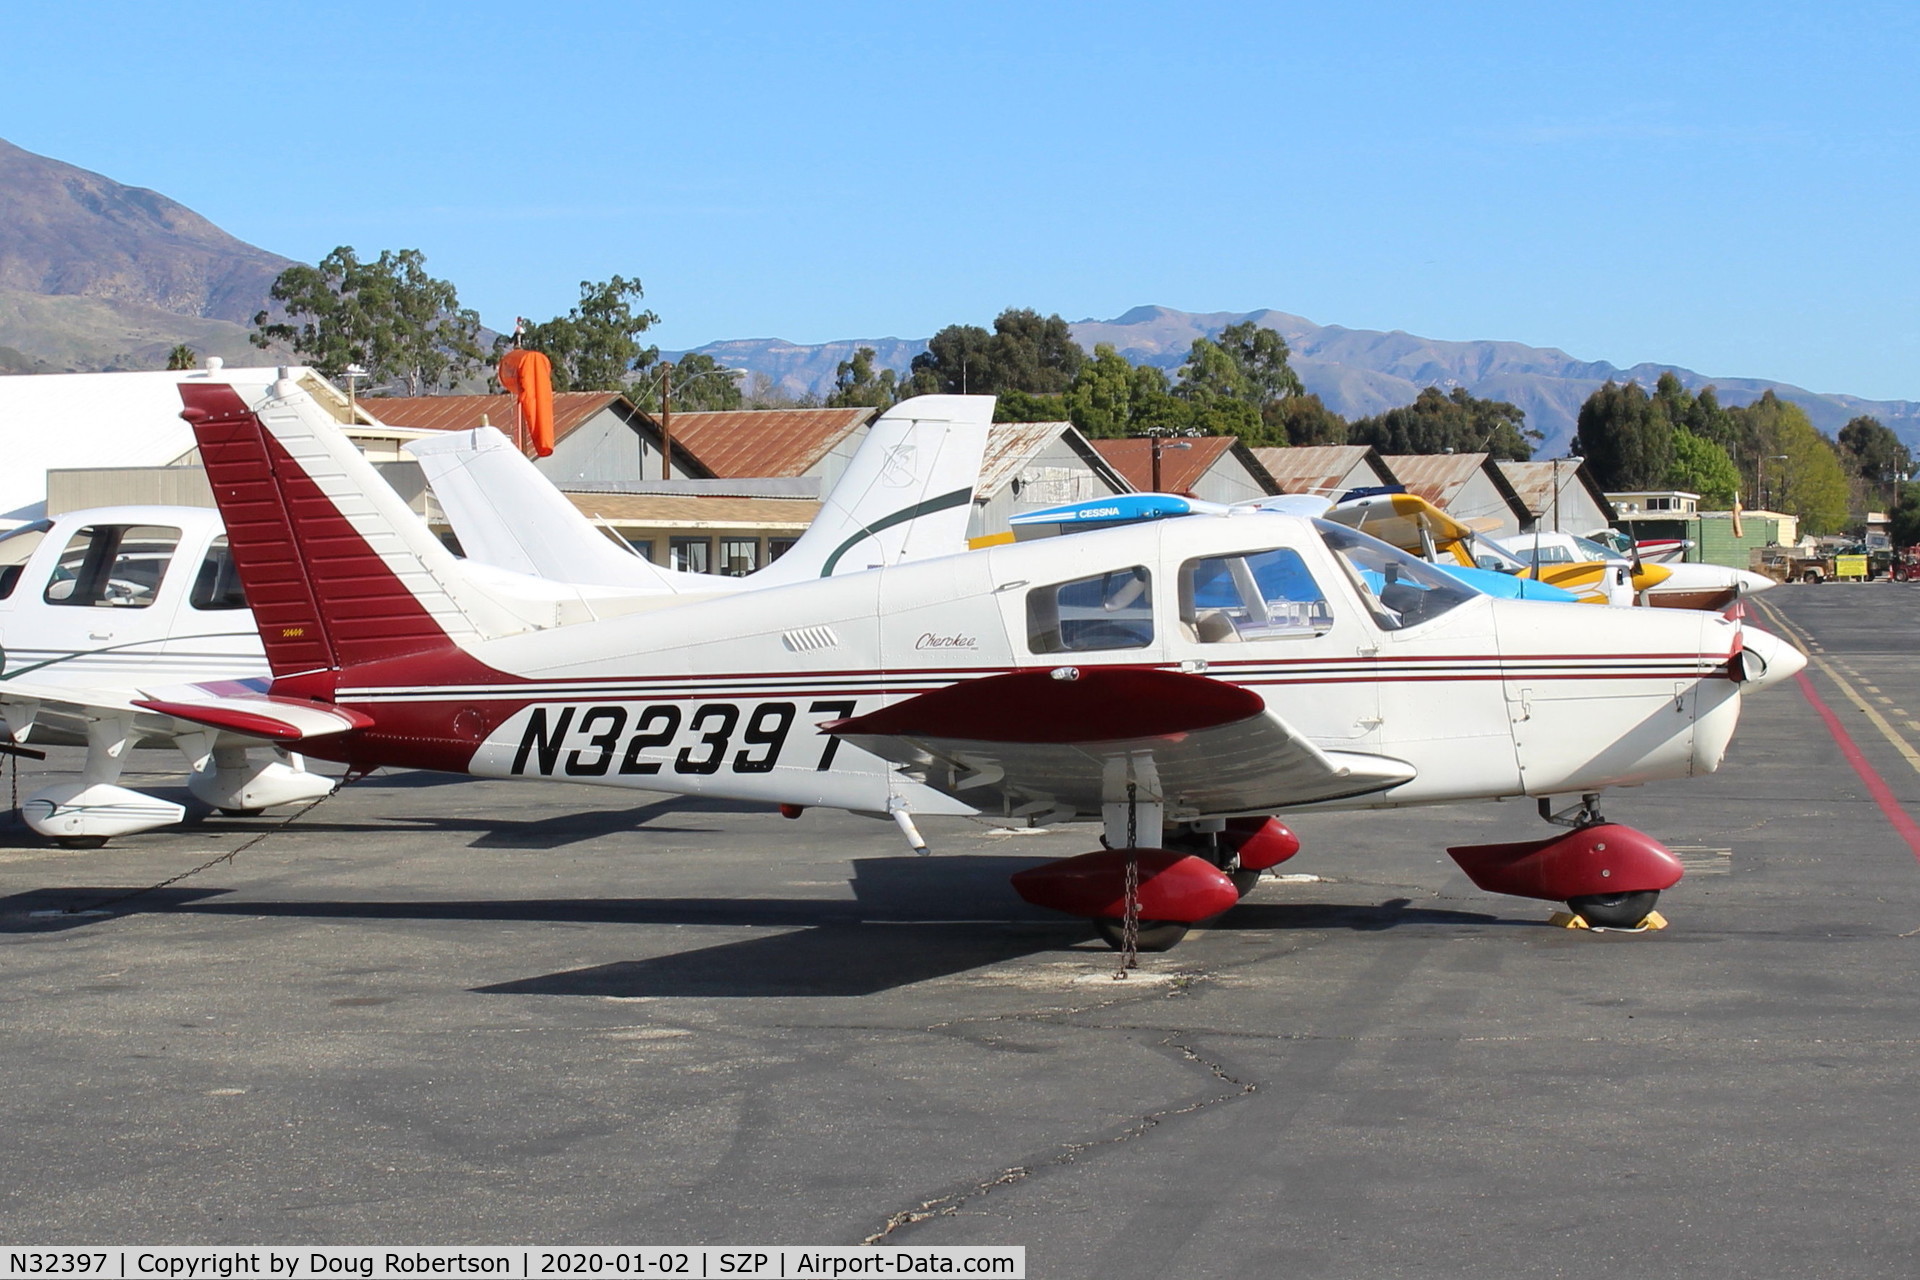 N32397, 1974 Piper PA-28-140 Cherokee C/N 28-7525062, 1974 Piper PA-28-140 CHEROKEE, Lycoming O-320-E2A 150 Hp, on Transient Ramp